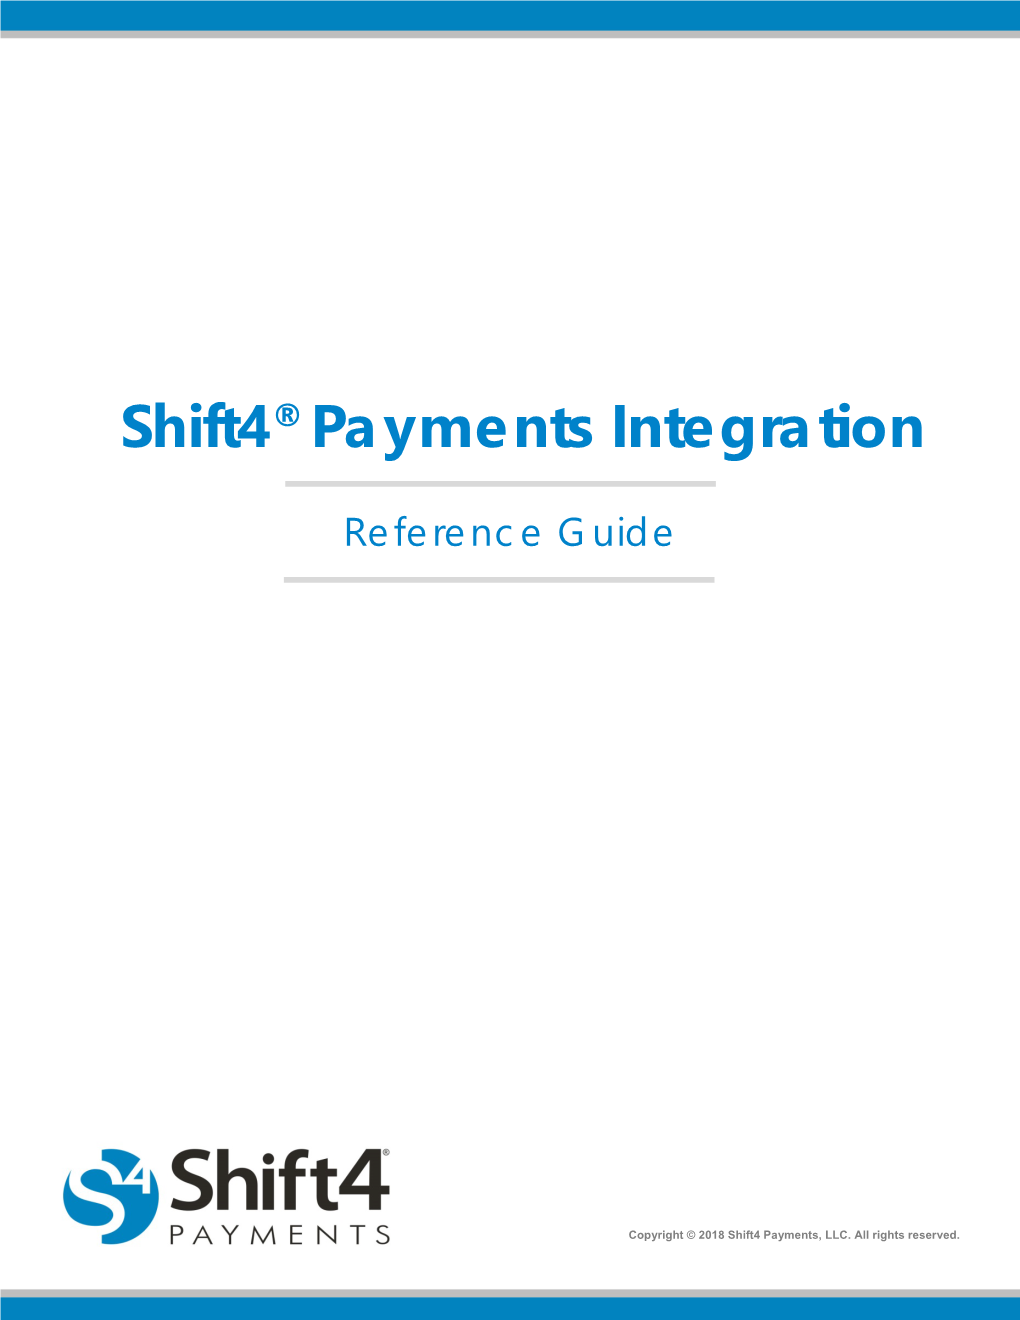 Shift4 Payments Integration: Reference Guide Publication Date: June 15, 2018